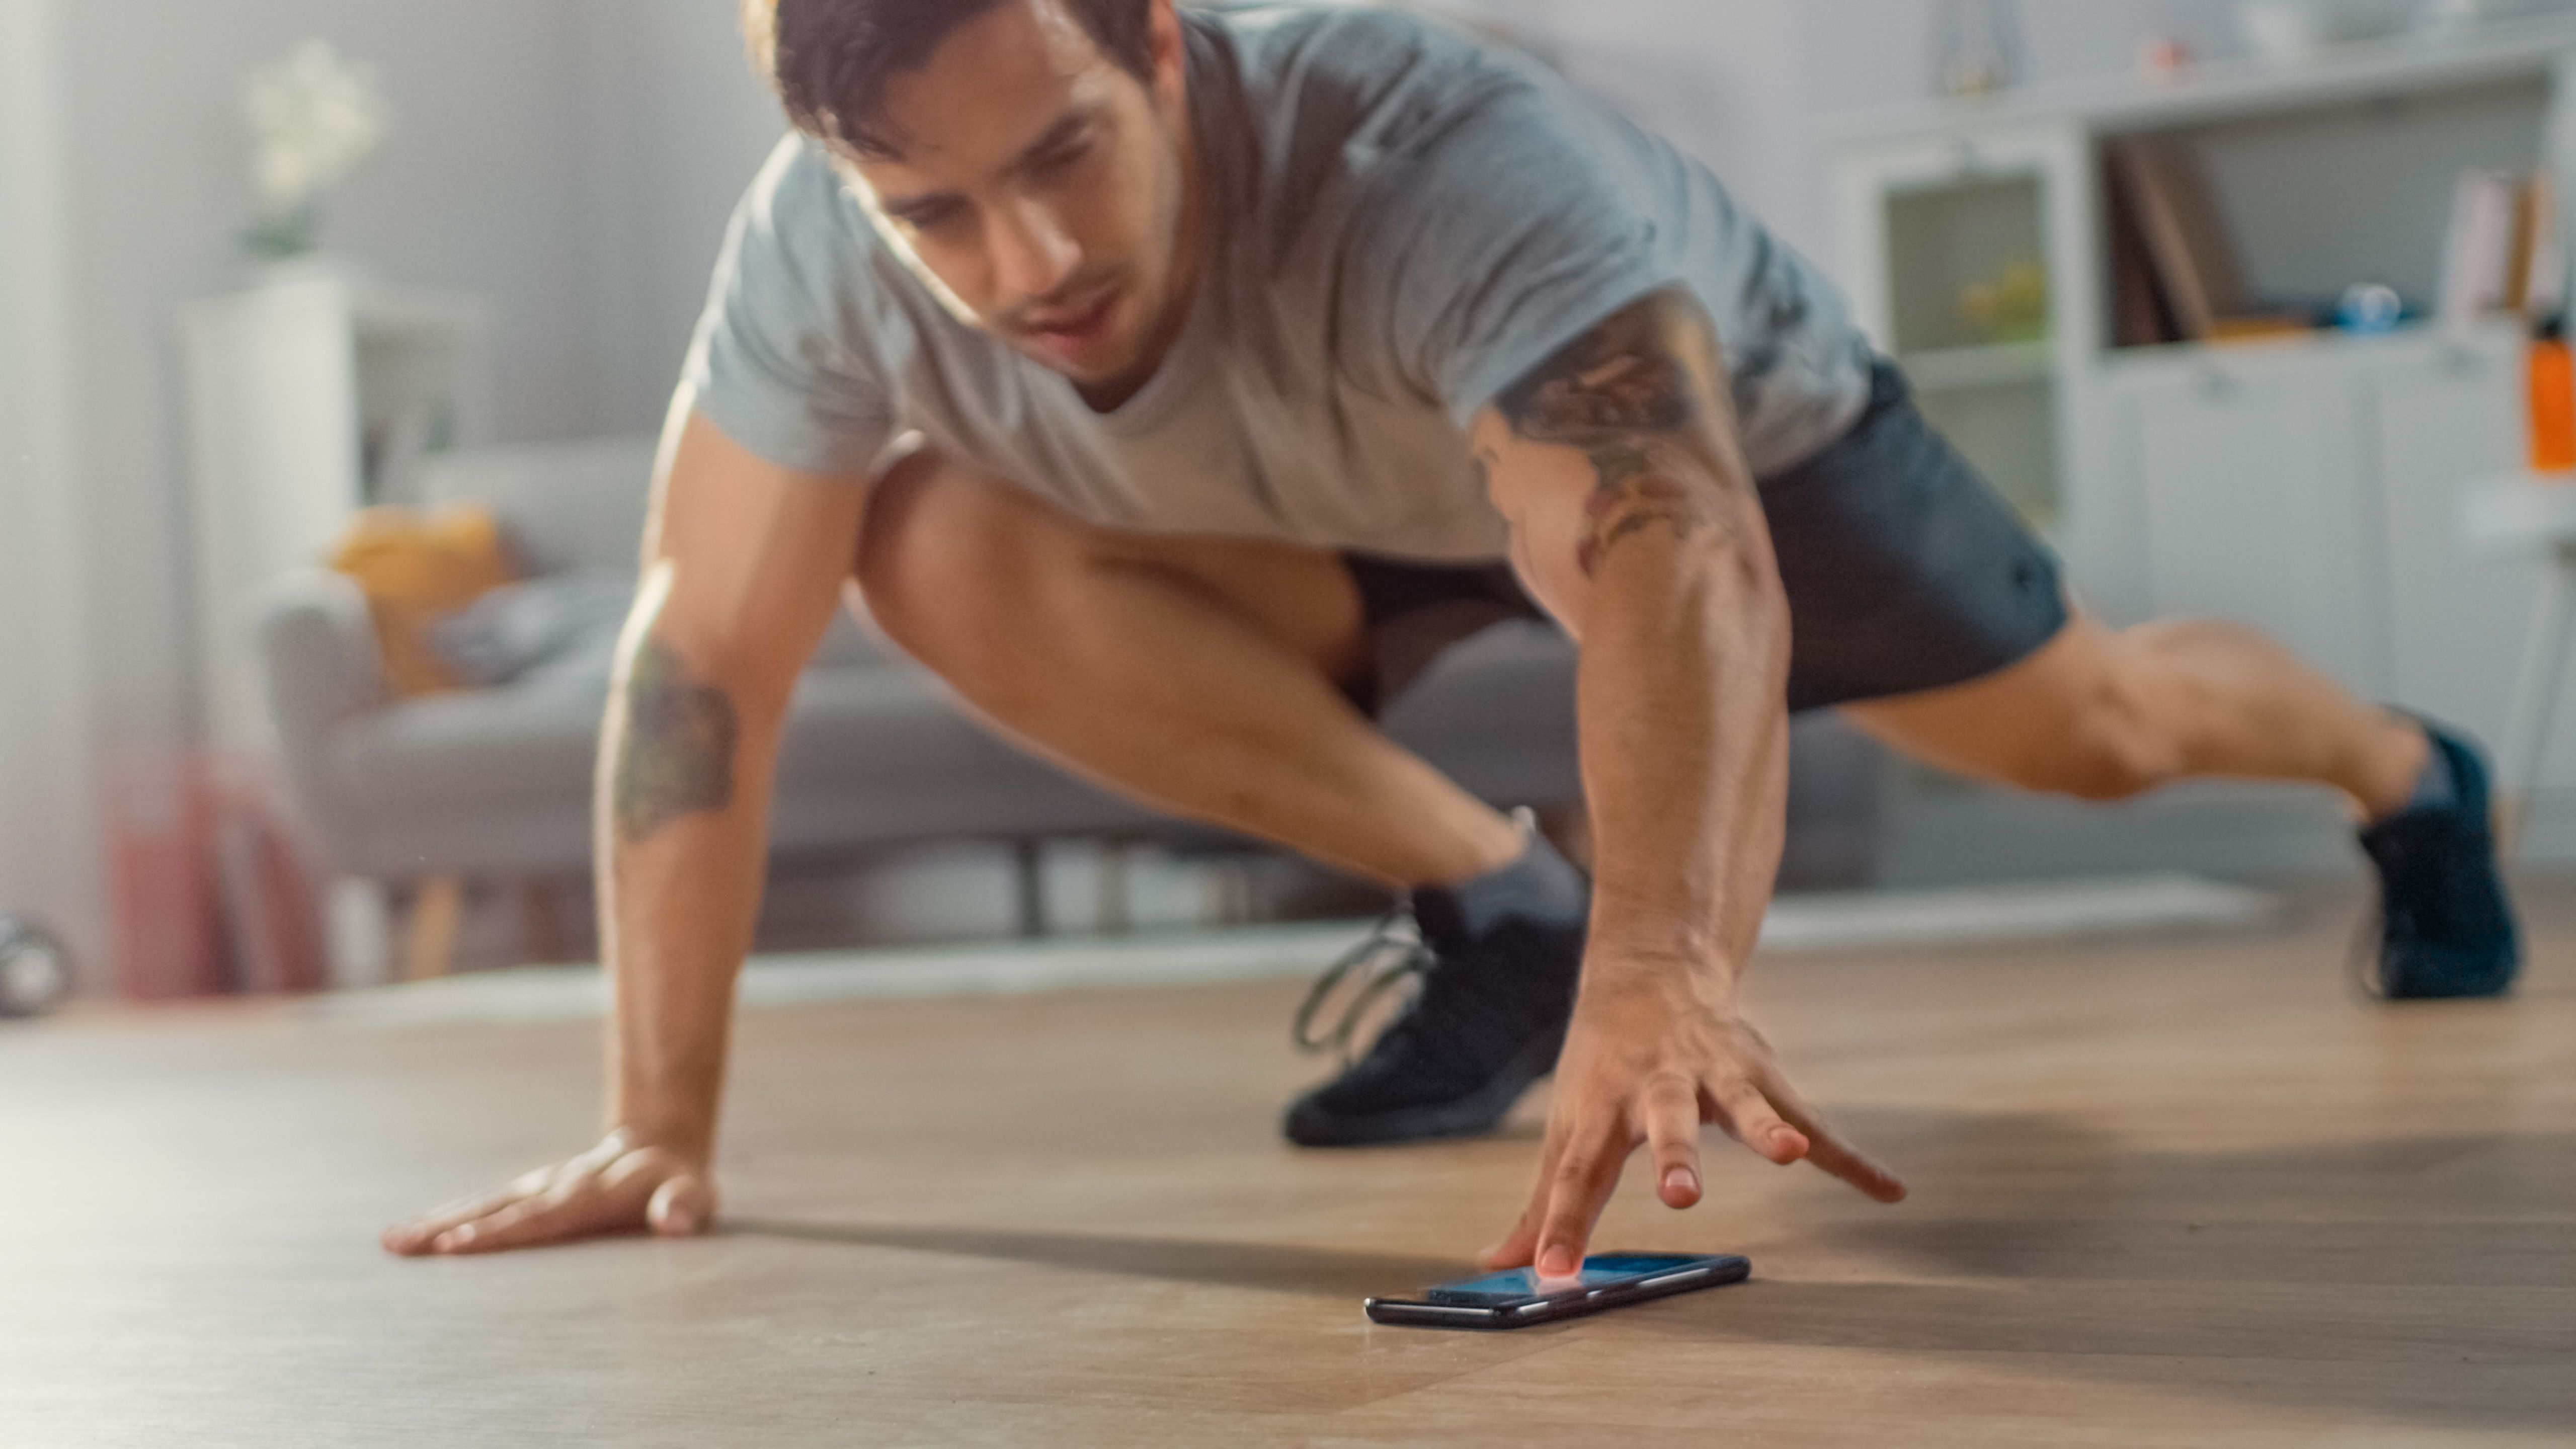 Muscular Athletic Fit Man in T-shirt and Shorts is Doing Mountain Climber Exercises While Using a Stopwatch on His Phone. He is Training at Home in His Bright Living Room with Minimalistic Interior.